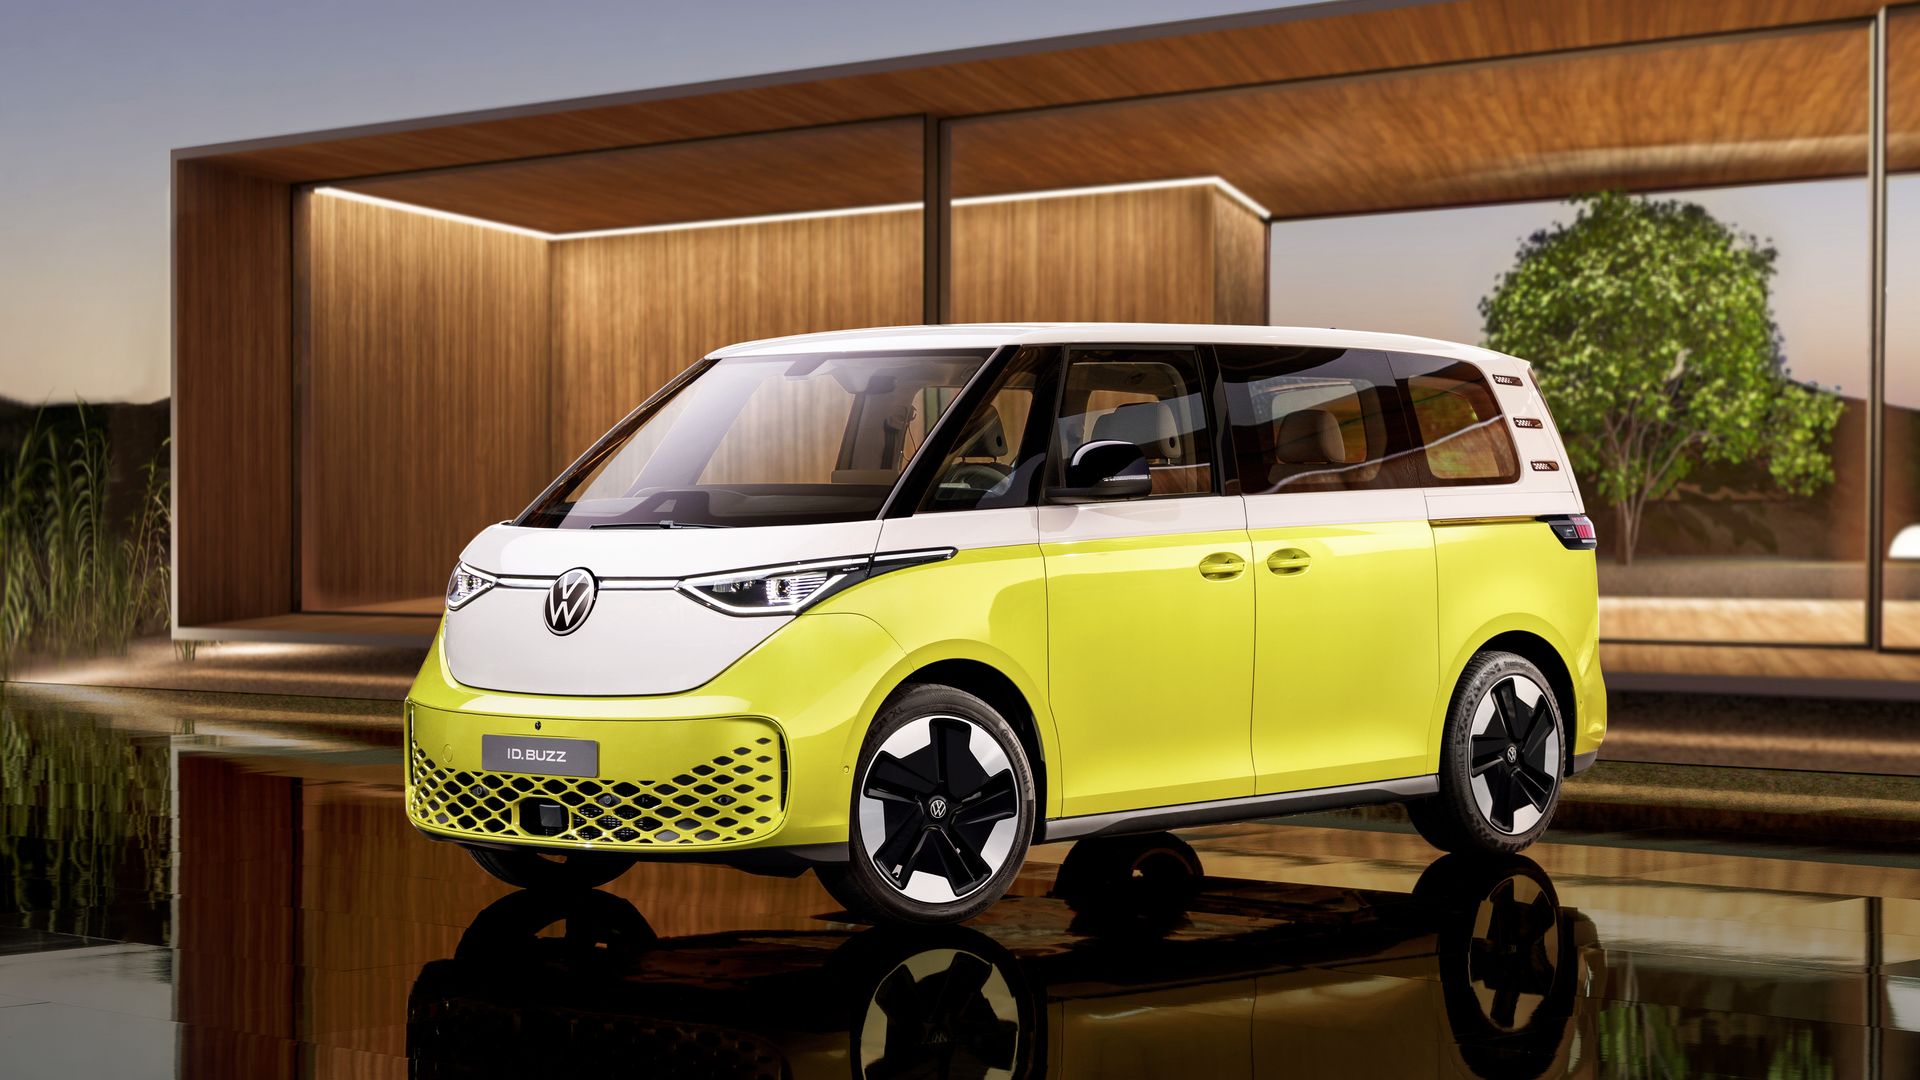 Photo of the upcoming electric VW minibus